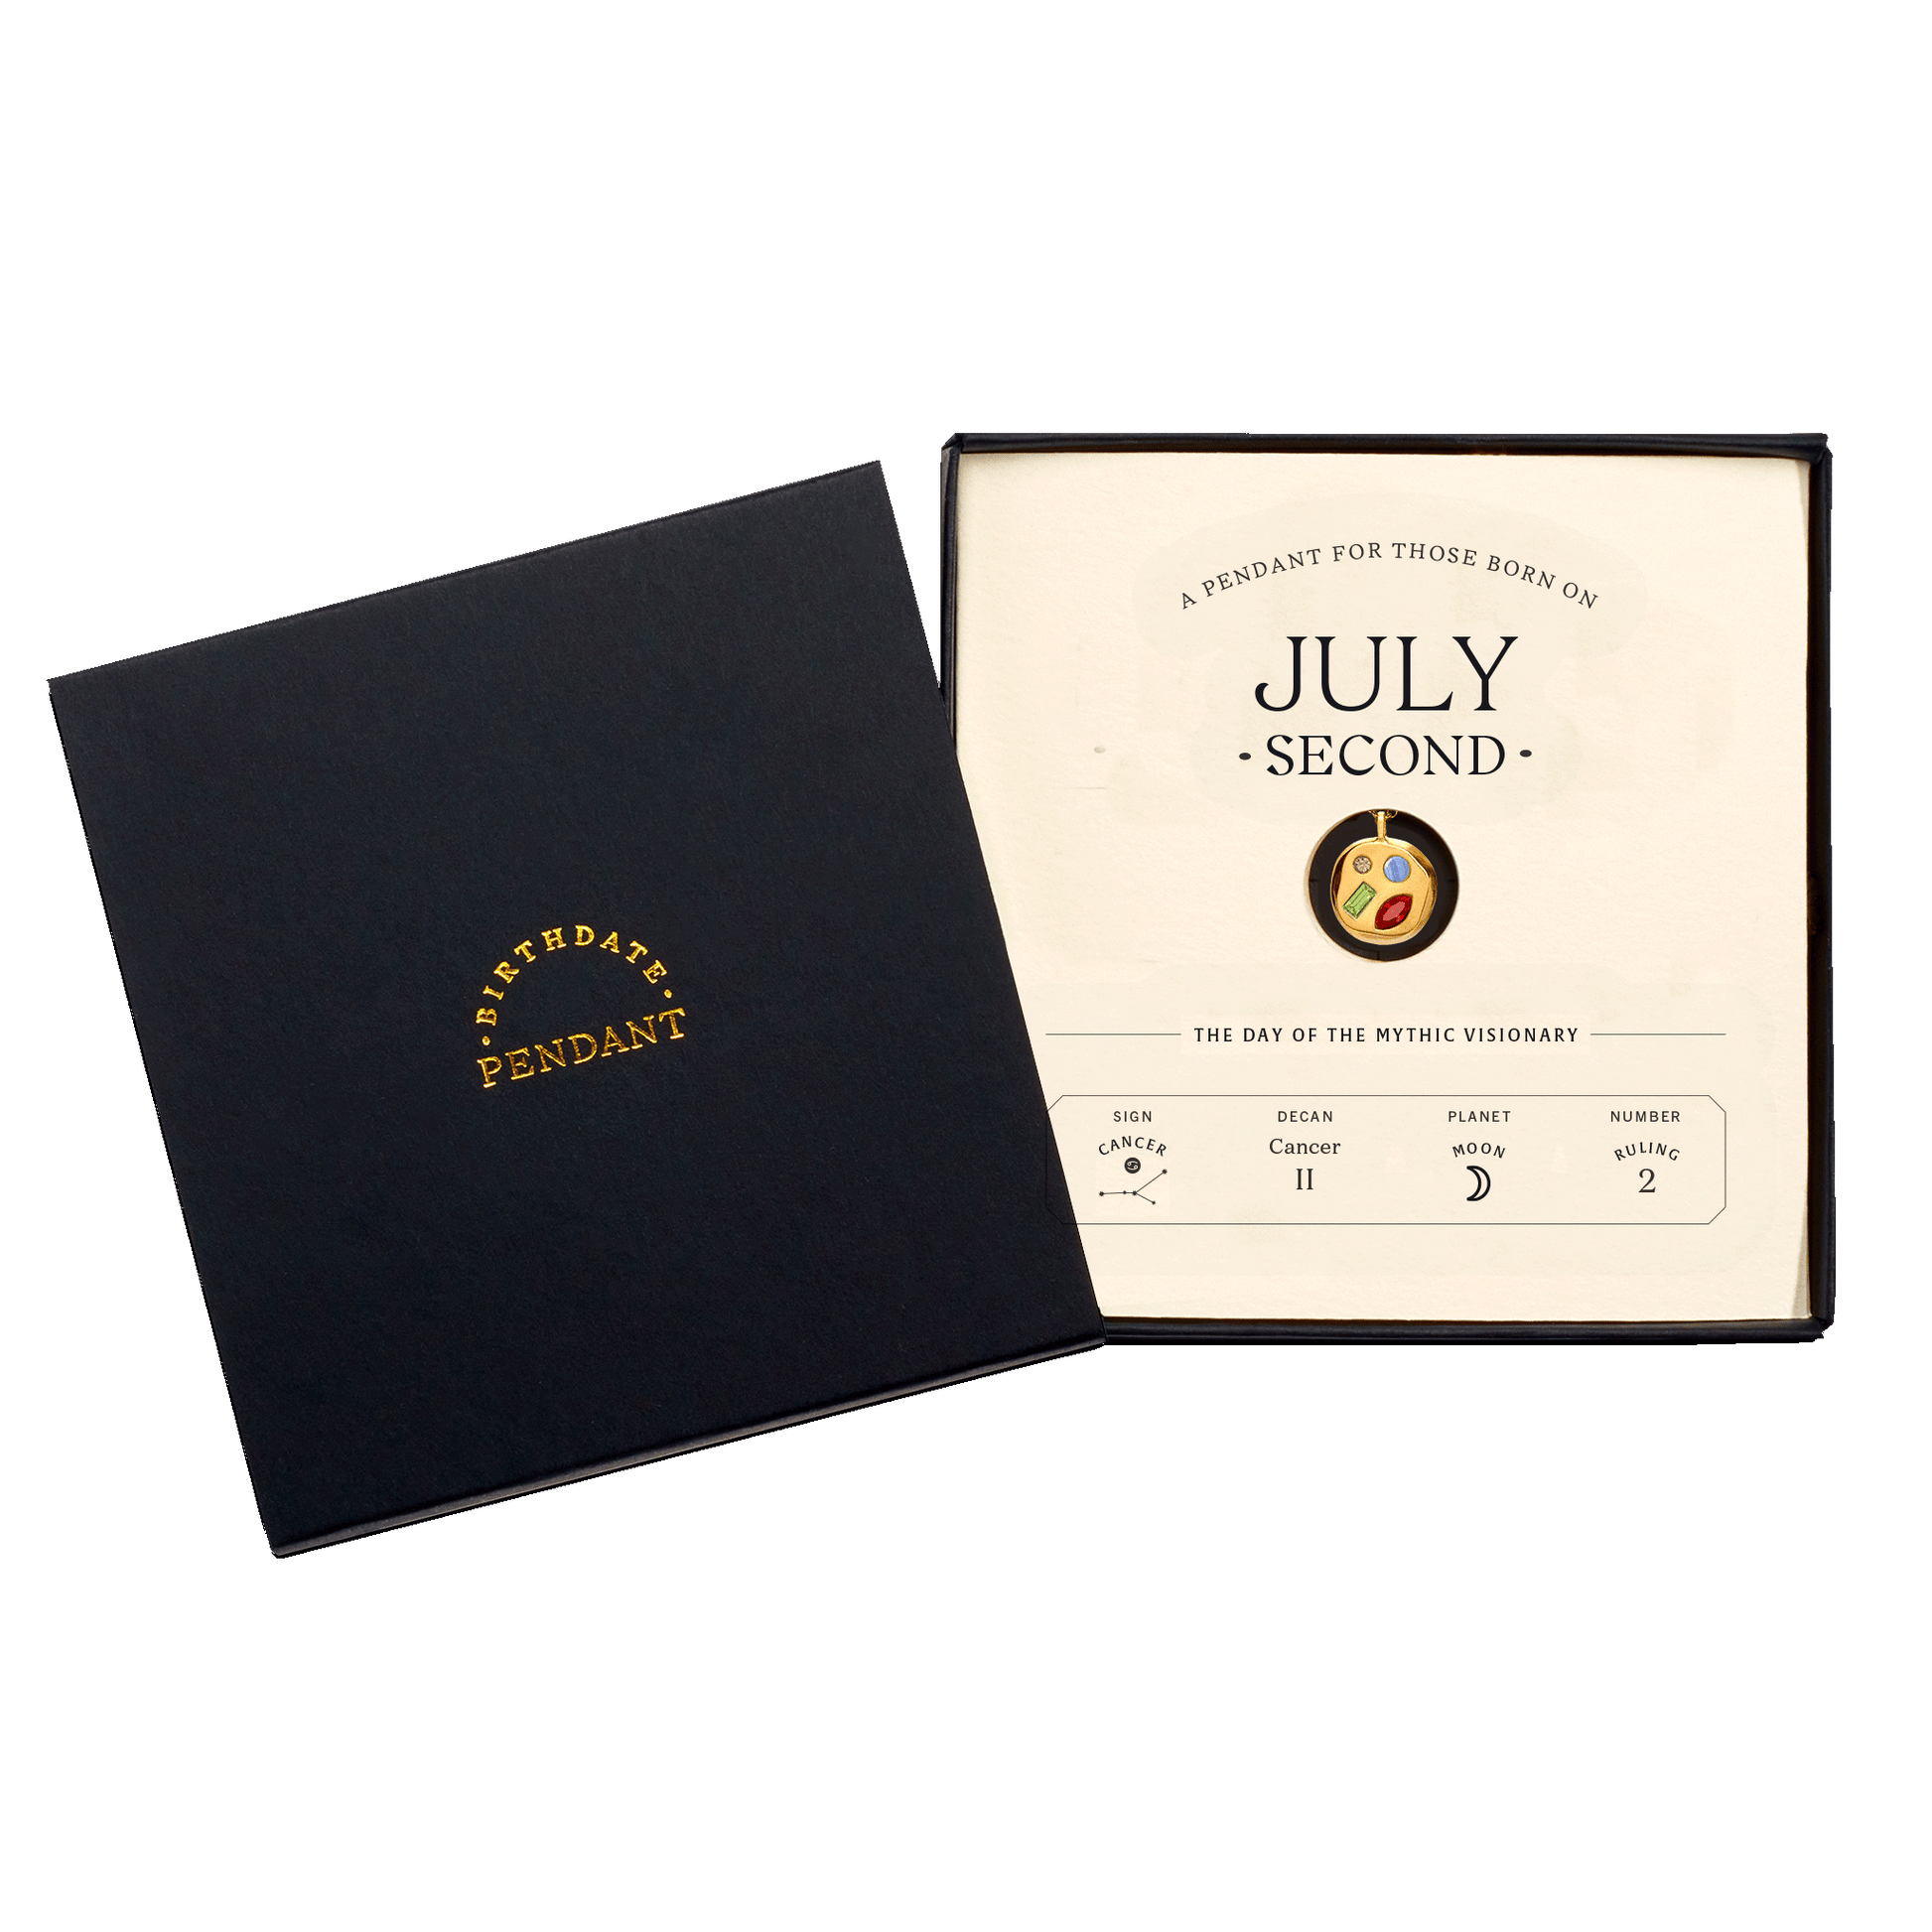 The July Second Pendant inside its box